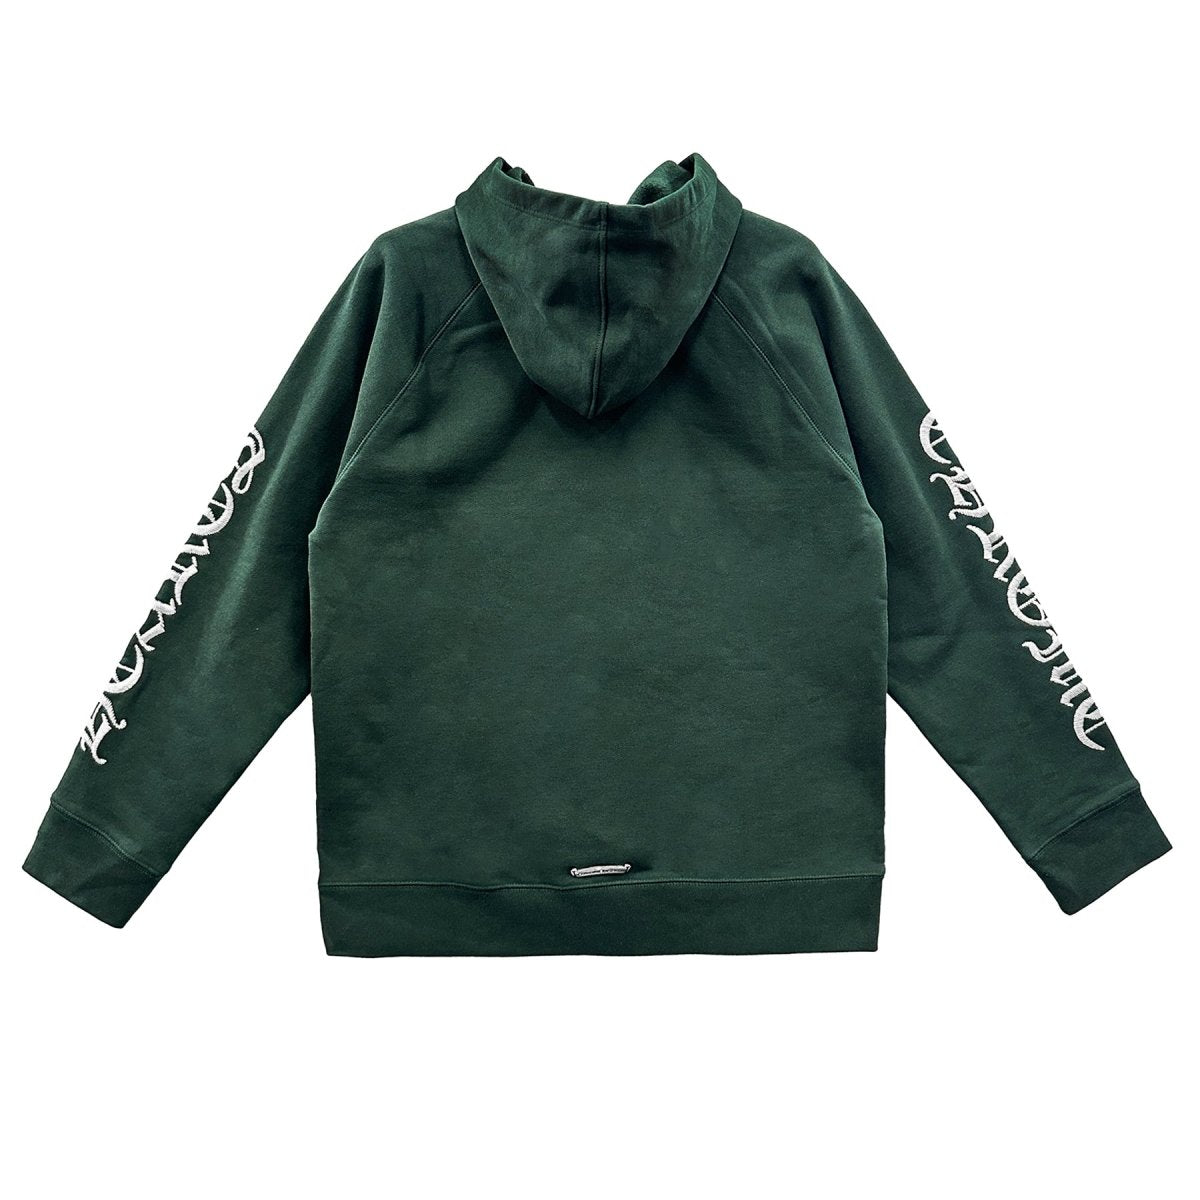 Chrome Hearts Embroidered Green CH Logo Hoodie - SHENGLI ROAD MARKET